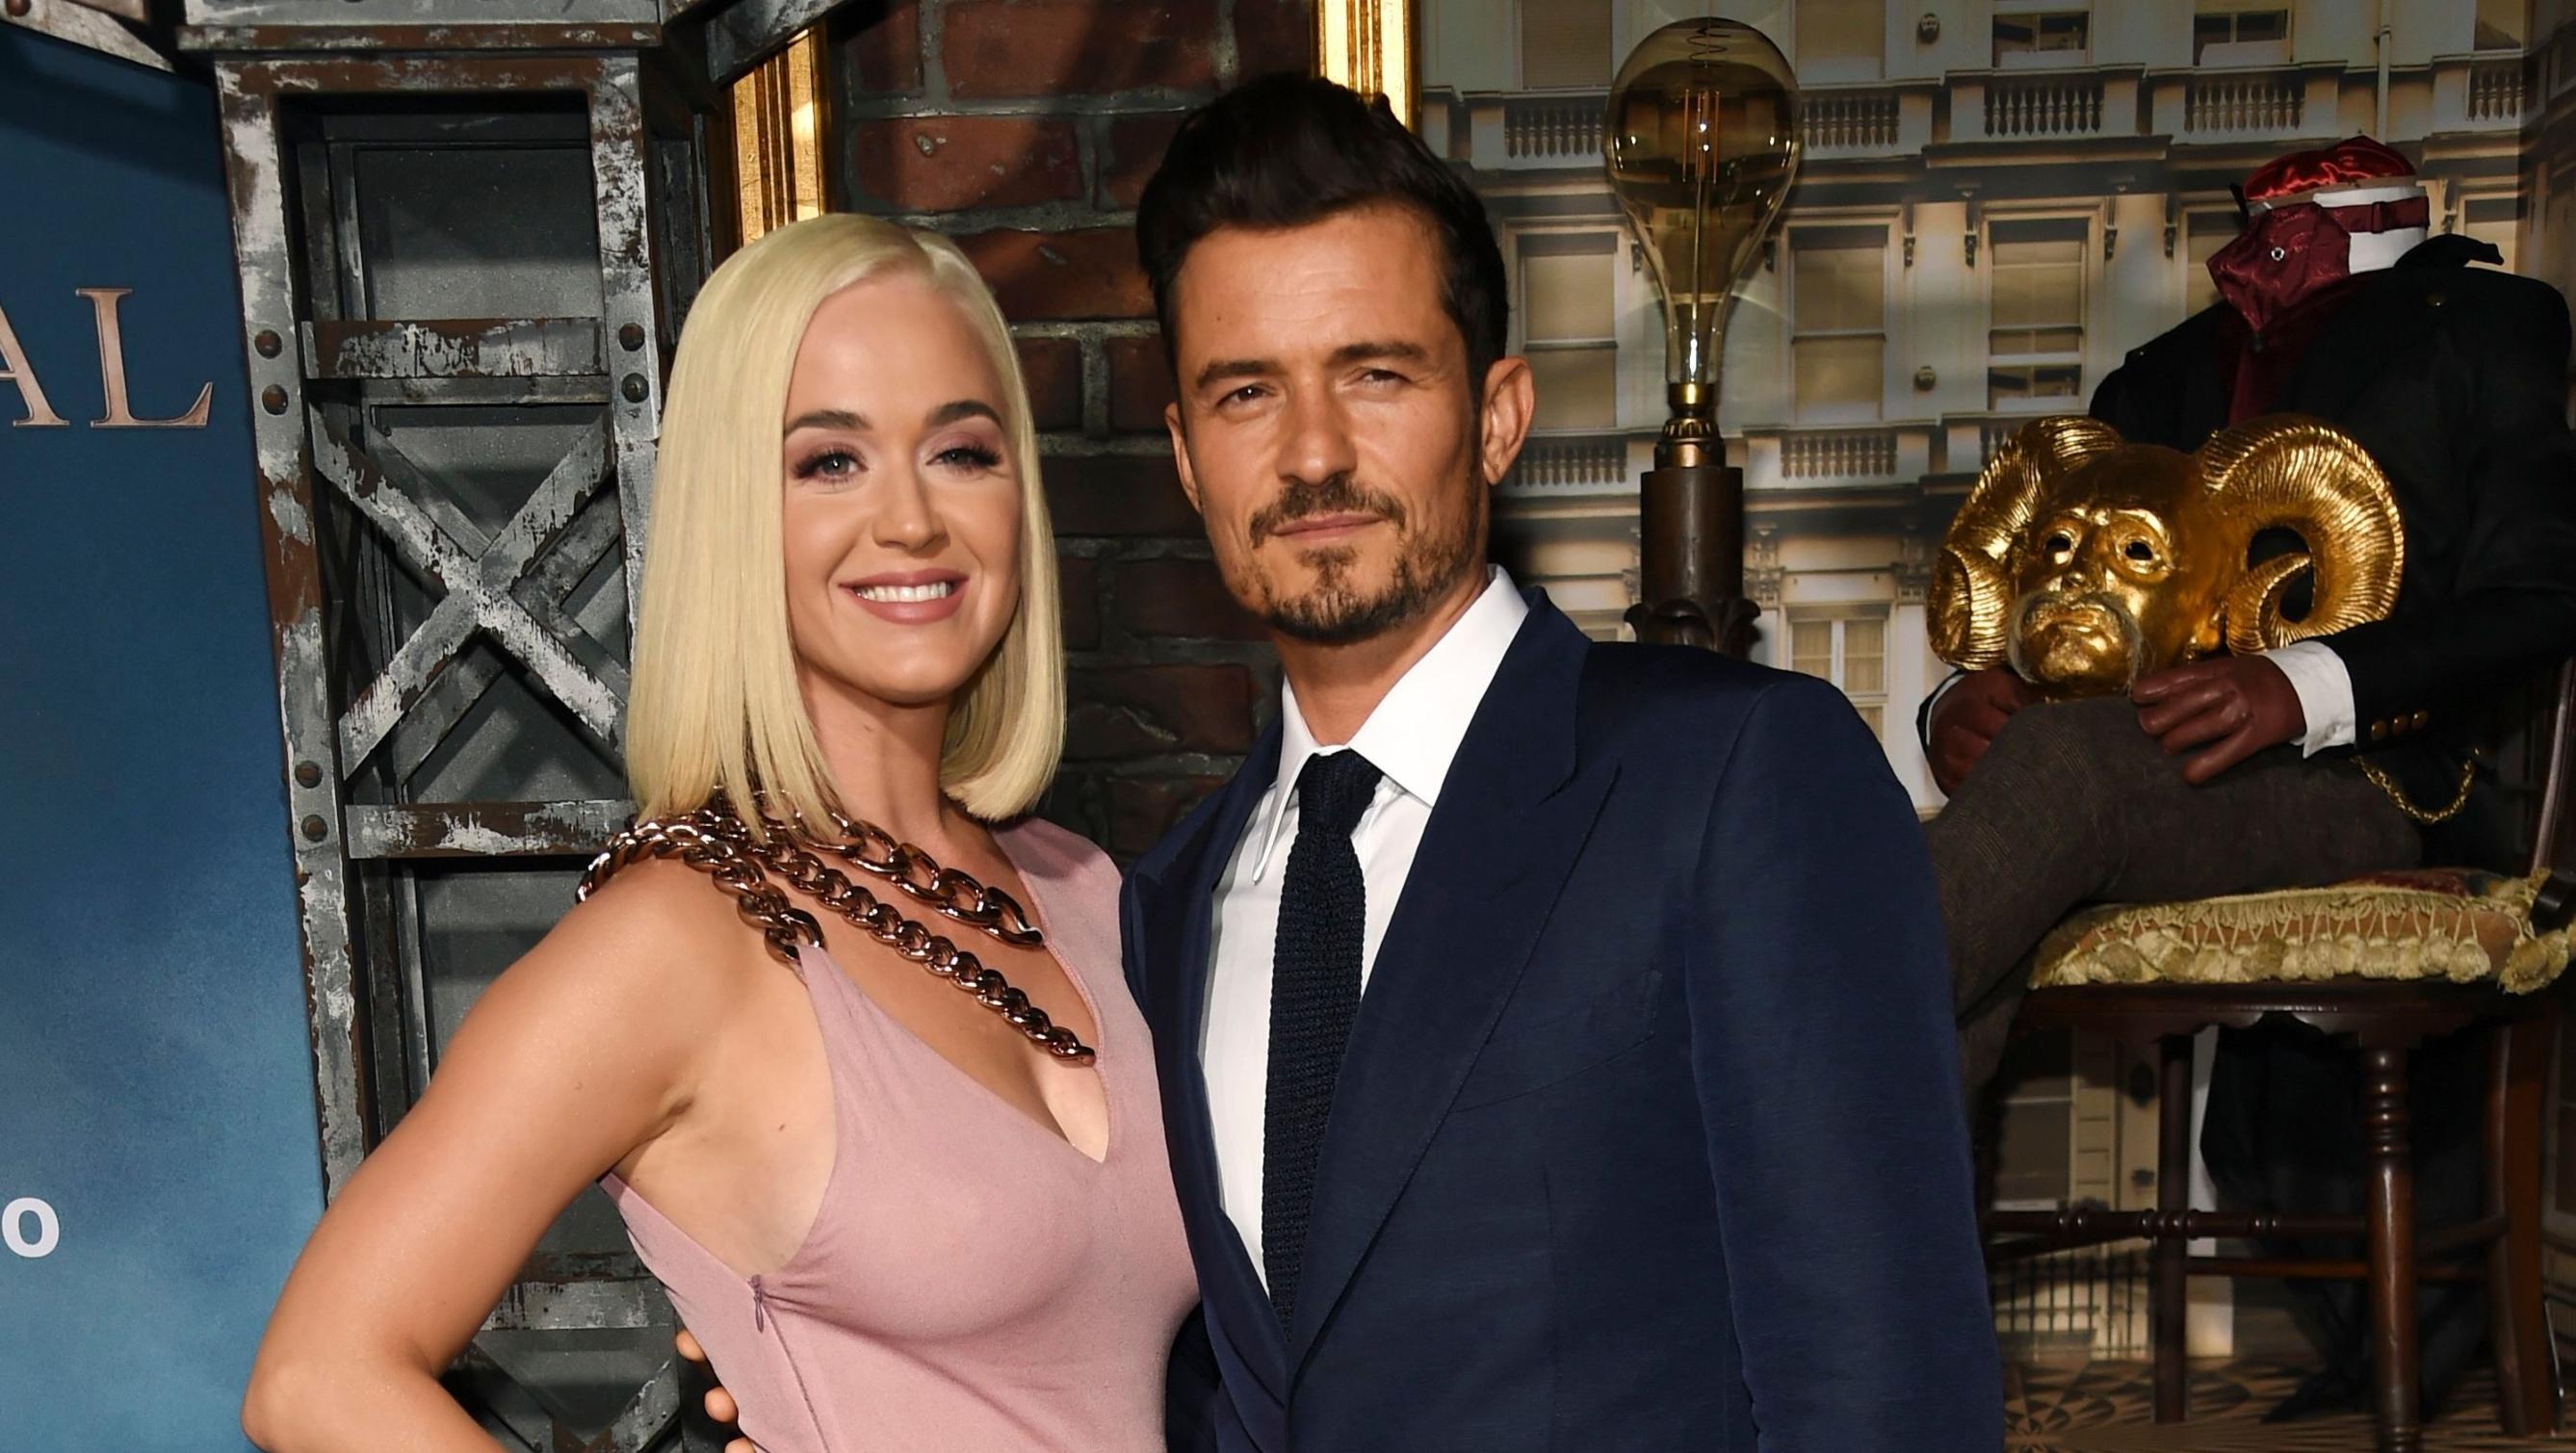 Orlando Bloom Doesn't Want A 2nd Divorce Ahead Of Katy Perry Wedding